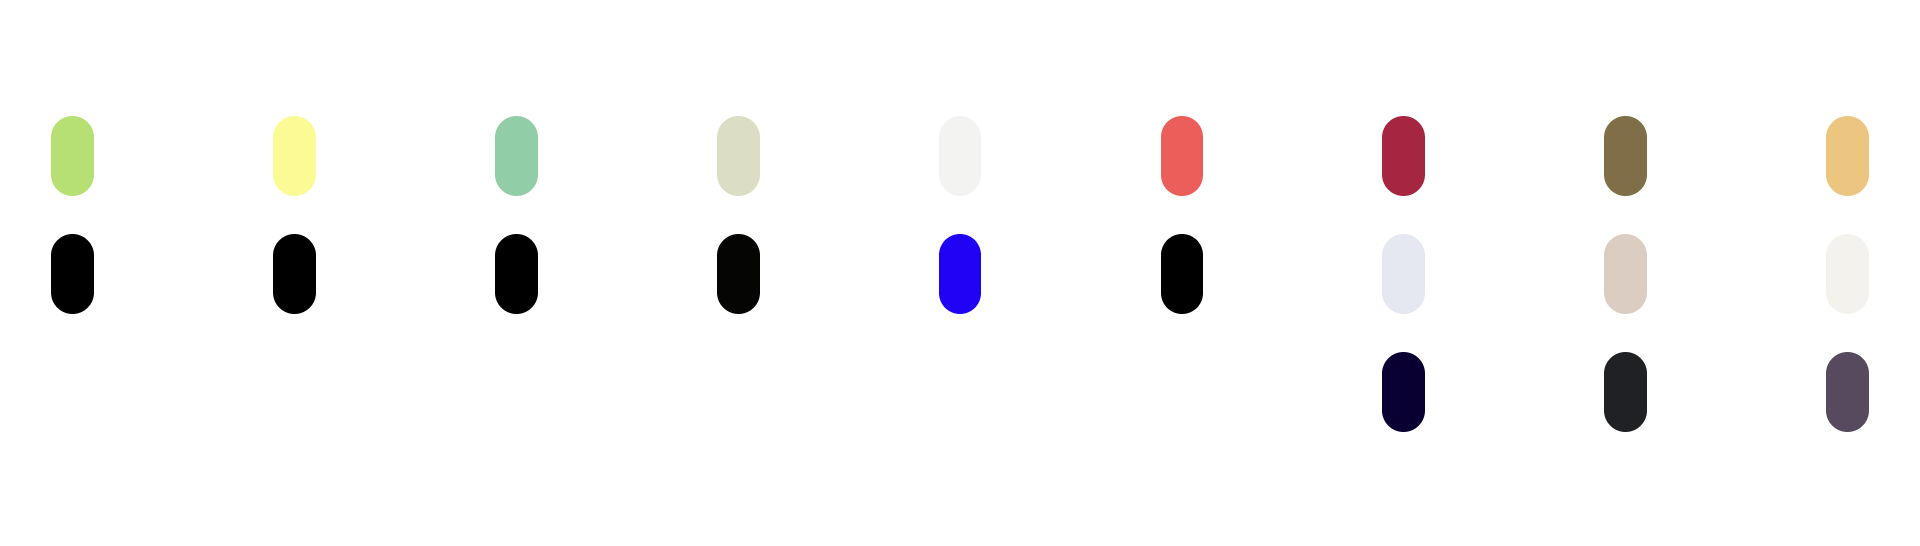 Dots of colors in twos and threes arranged in rows across a white background.